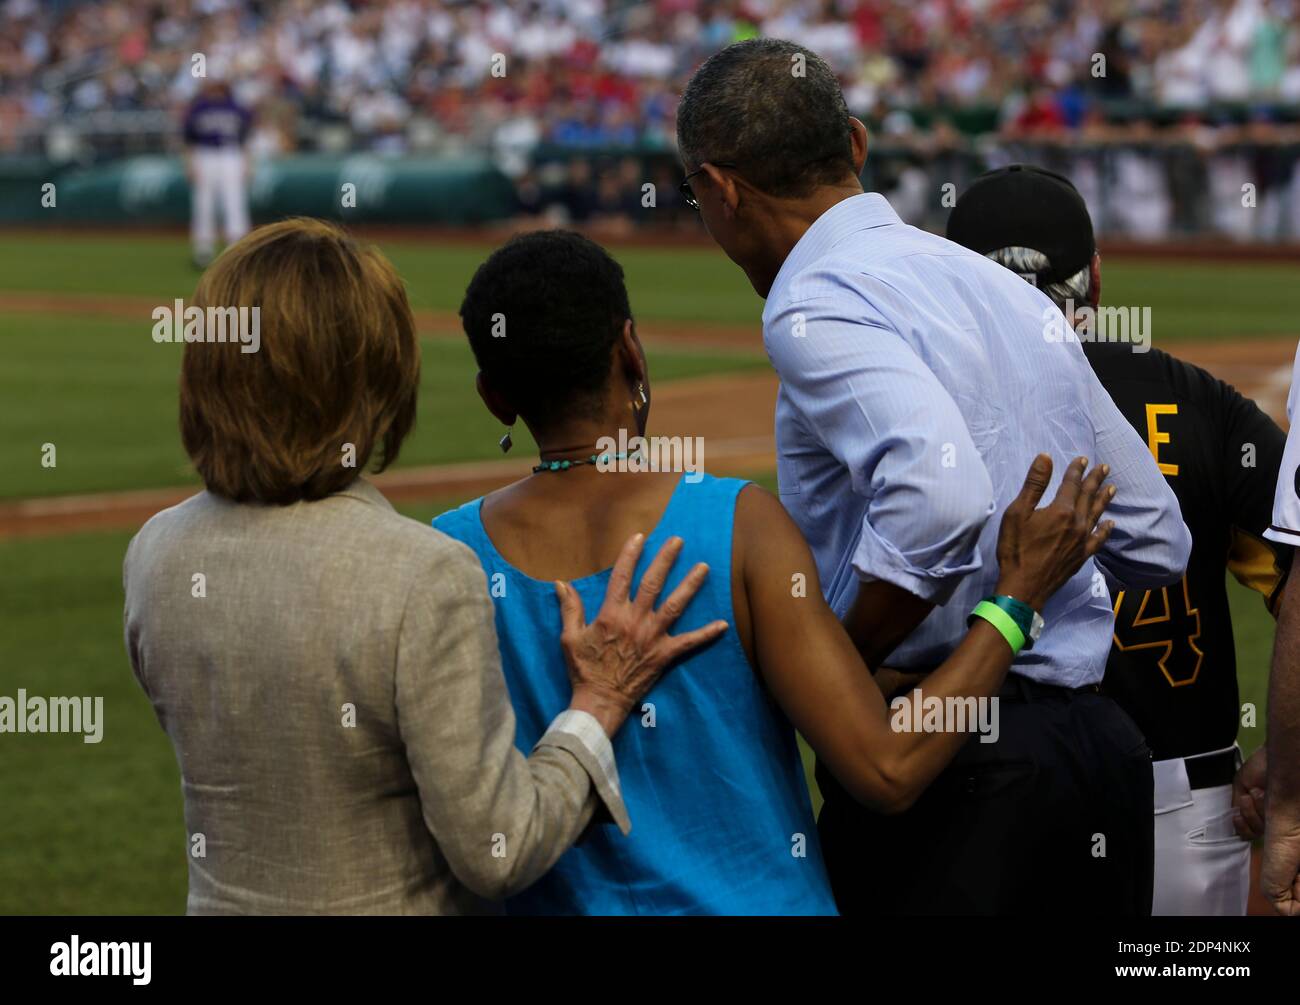 US President Barack Obama (R) with Congresswoman Donna Edwards D-MD (C) and Minority Leader Nancy Pelosi (L) watch the 2015 Congressional Baseball Game at the Nationals Park Stadium, in Washington, DC, USA, on June 11, 2015. Photo by Aude Guerrucci/Pool/ABACAPRESS.COM Stock Photo